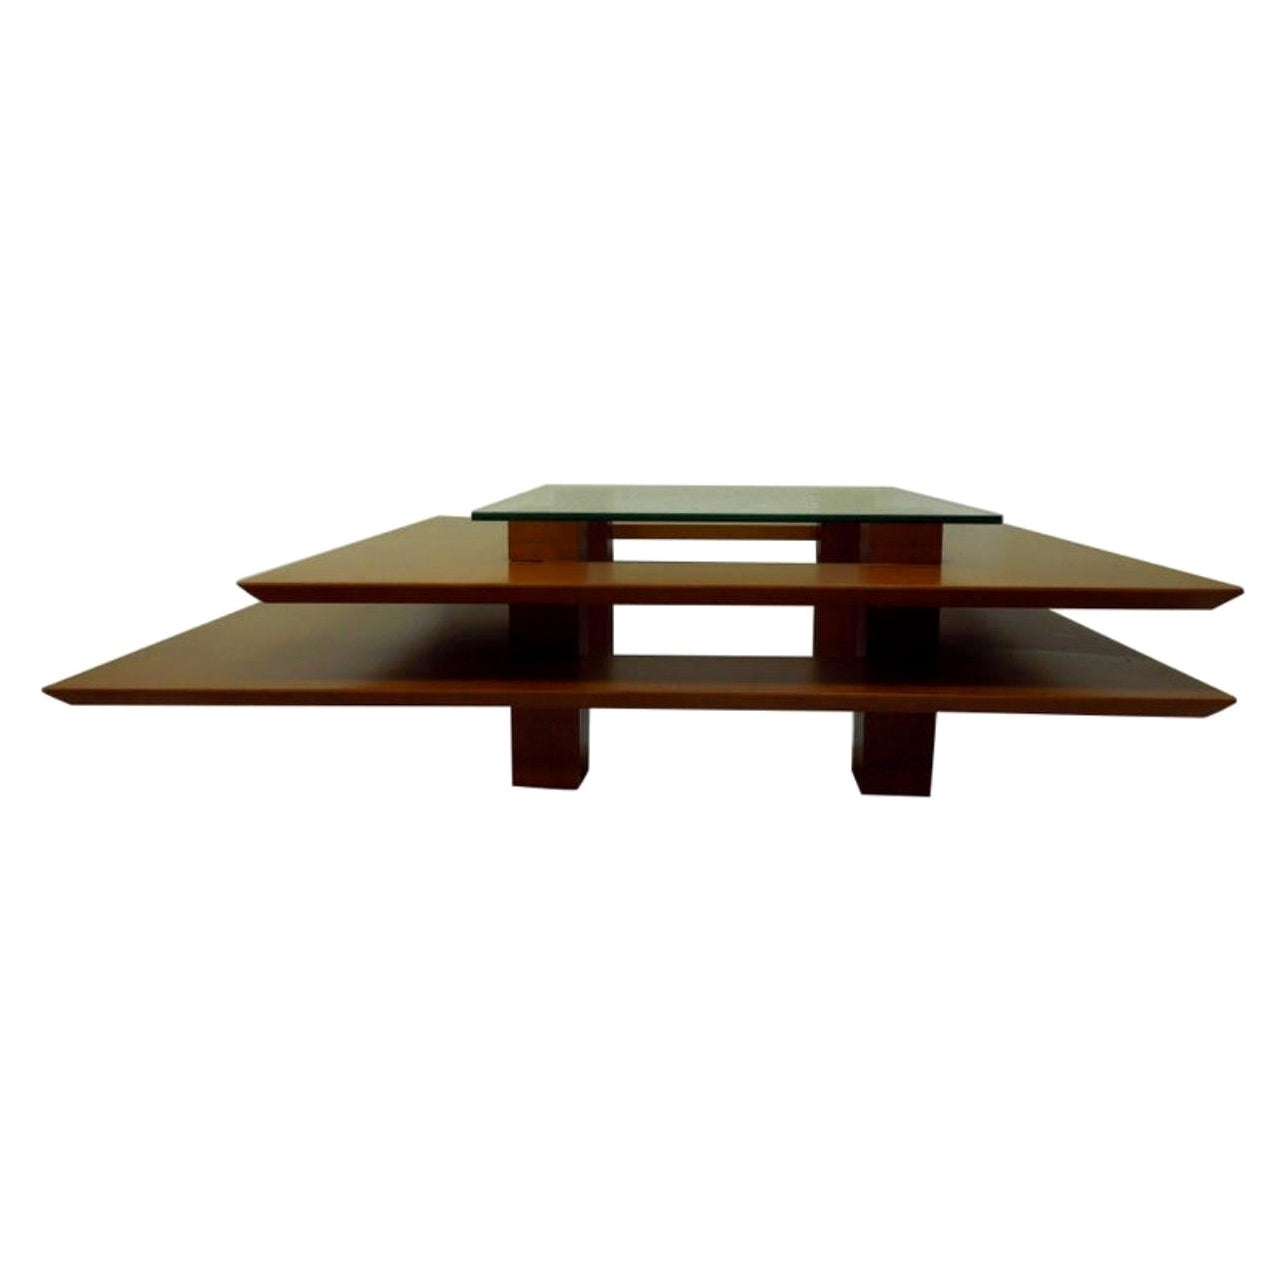 Clemmer Heidsieck Three-Tier 1990s French Modern Coffee Table For Sale